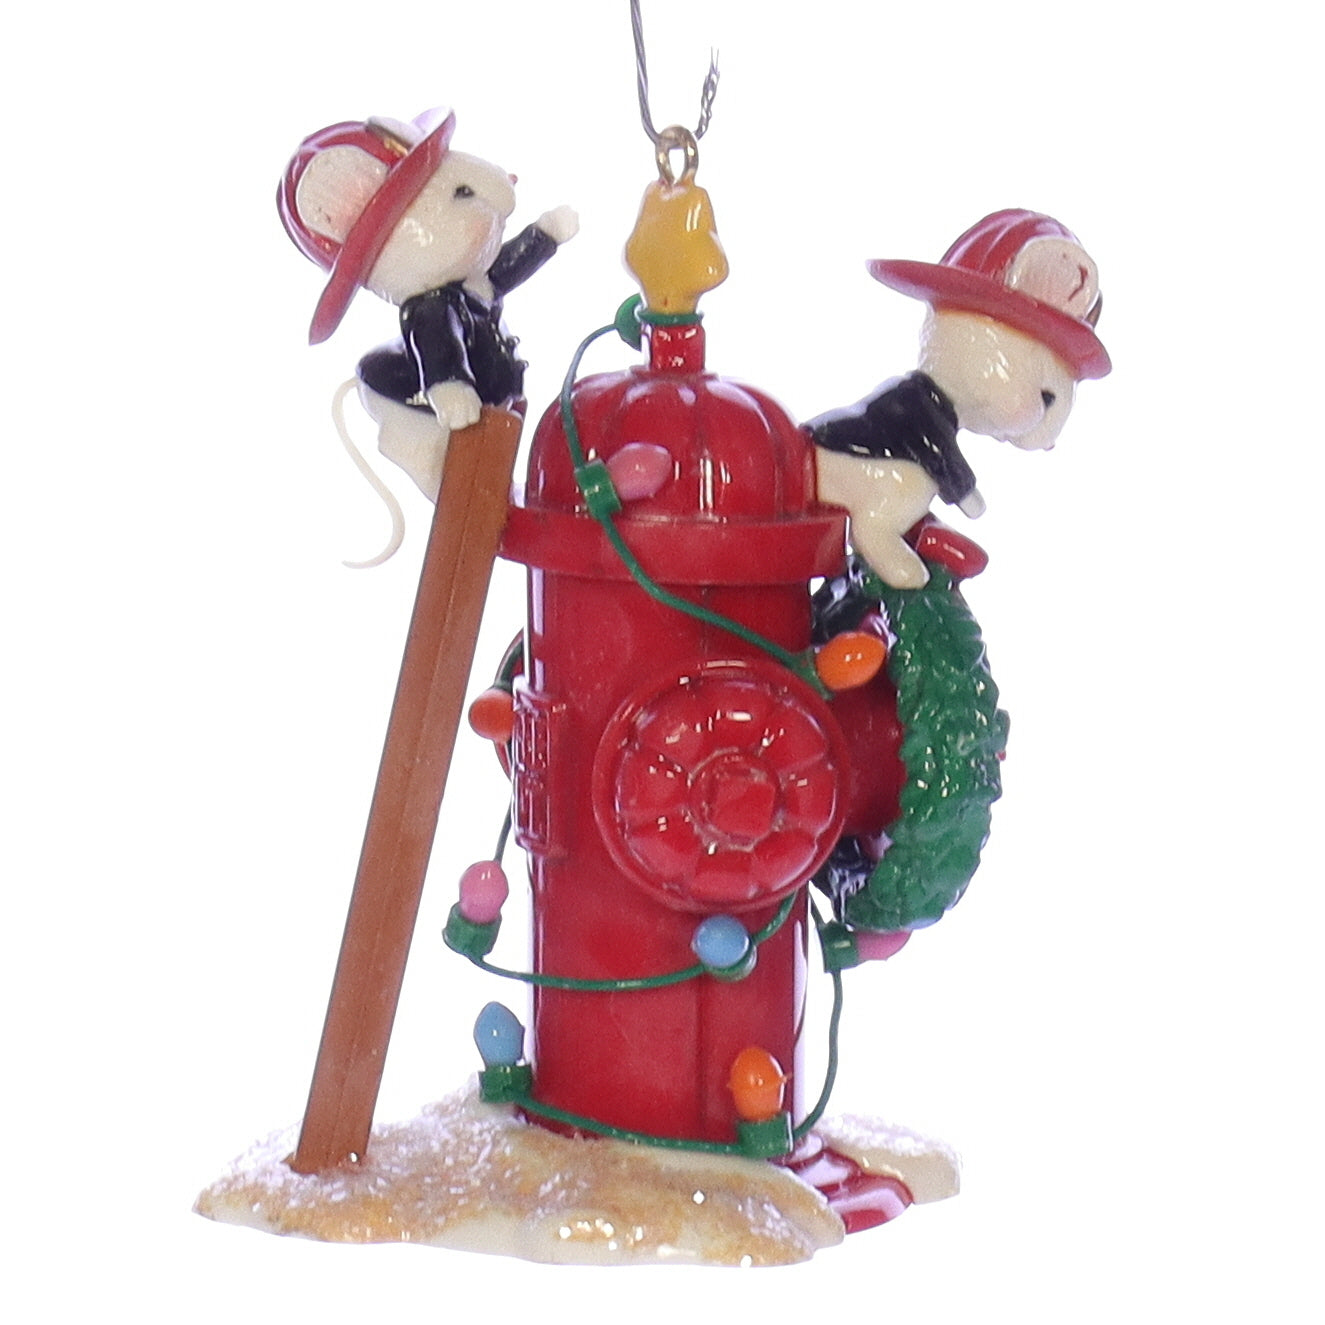 Enesco_Treasury_of_Christmas_Ornaments_573825_Warmest_Wishes_Northpole_Fire_Department_Mouse_Ornament_1990 Back View